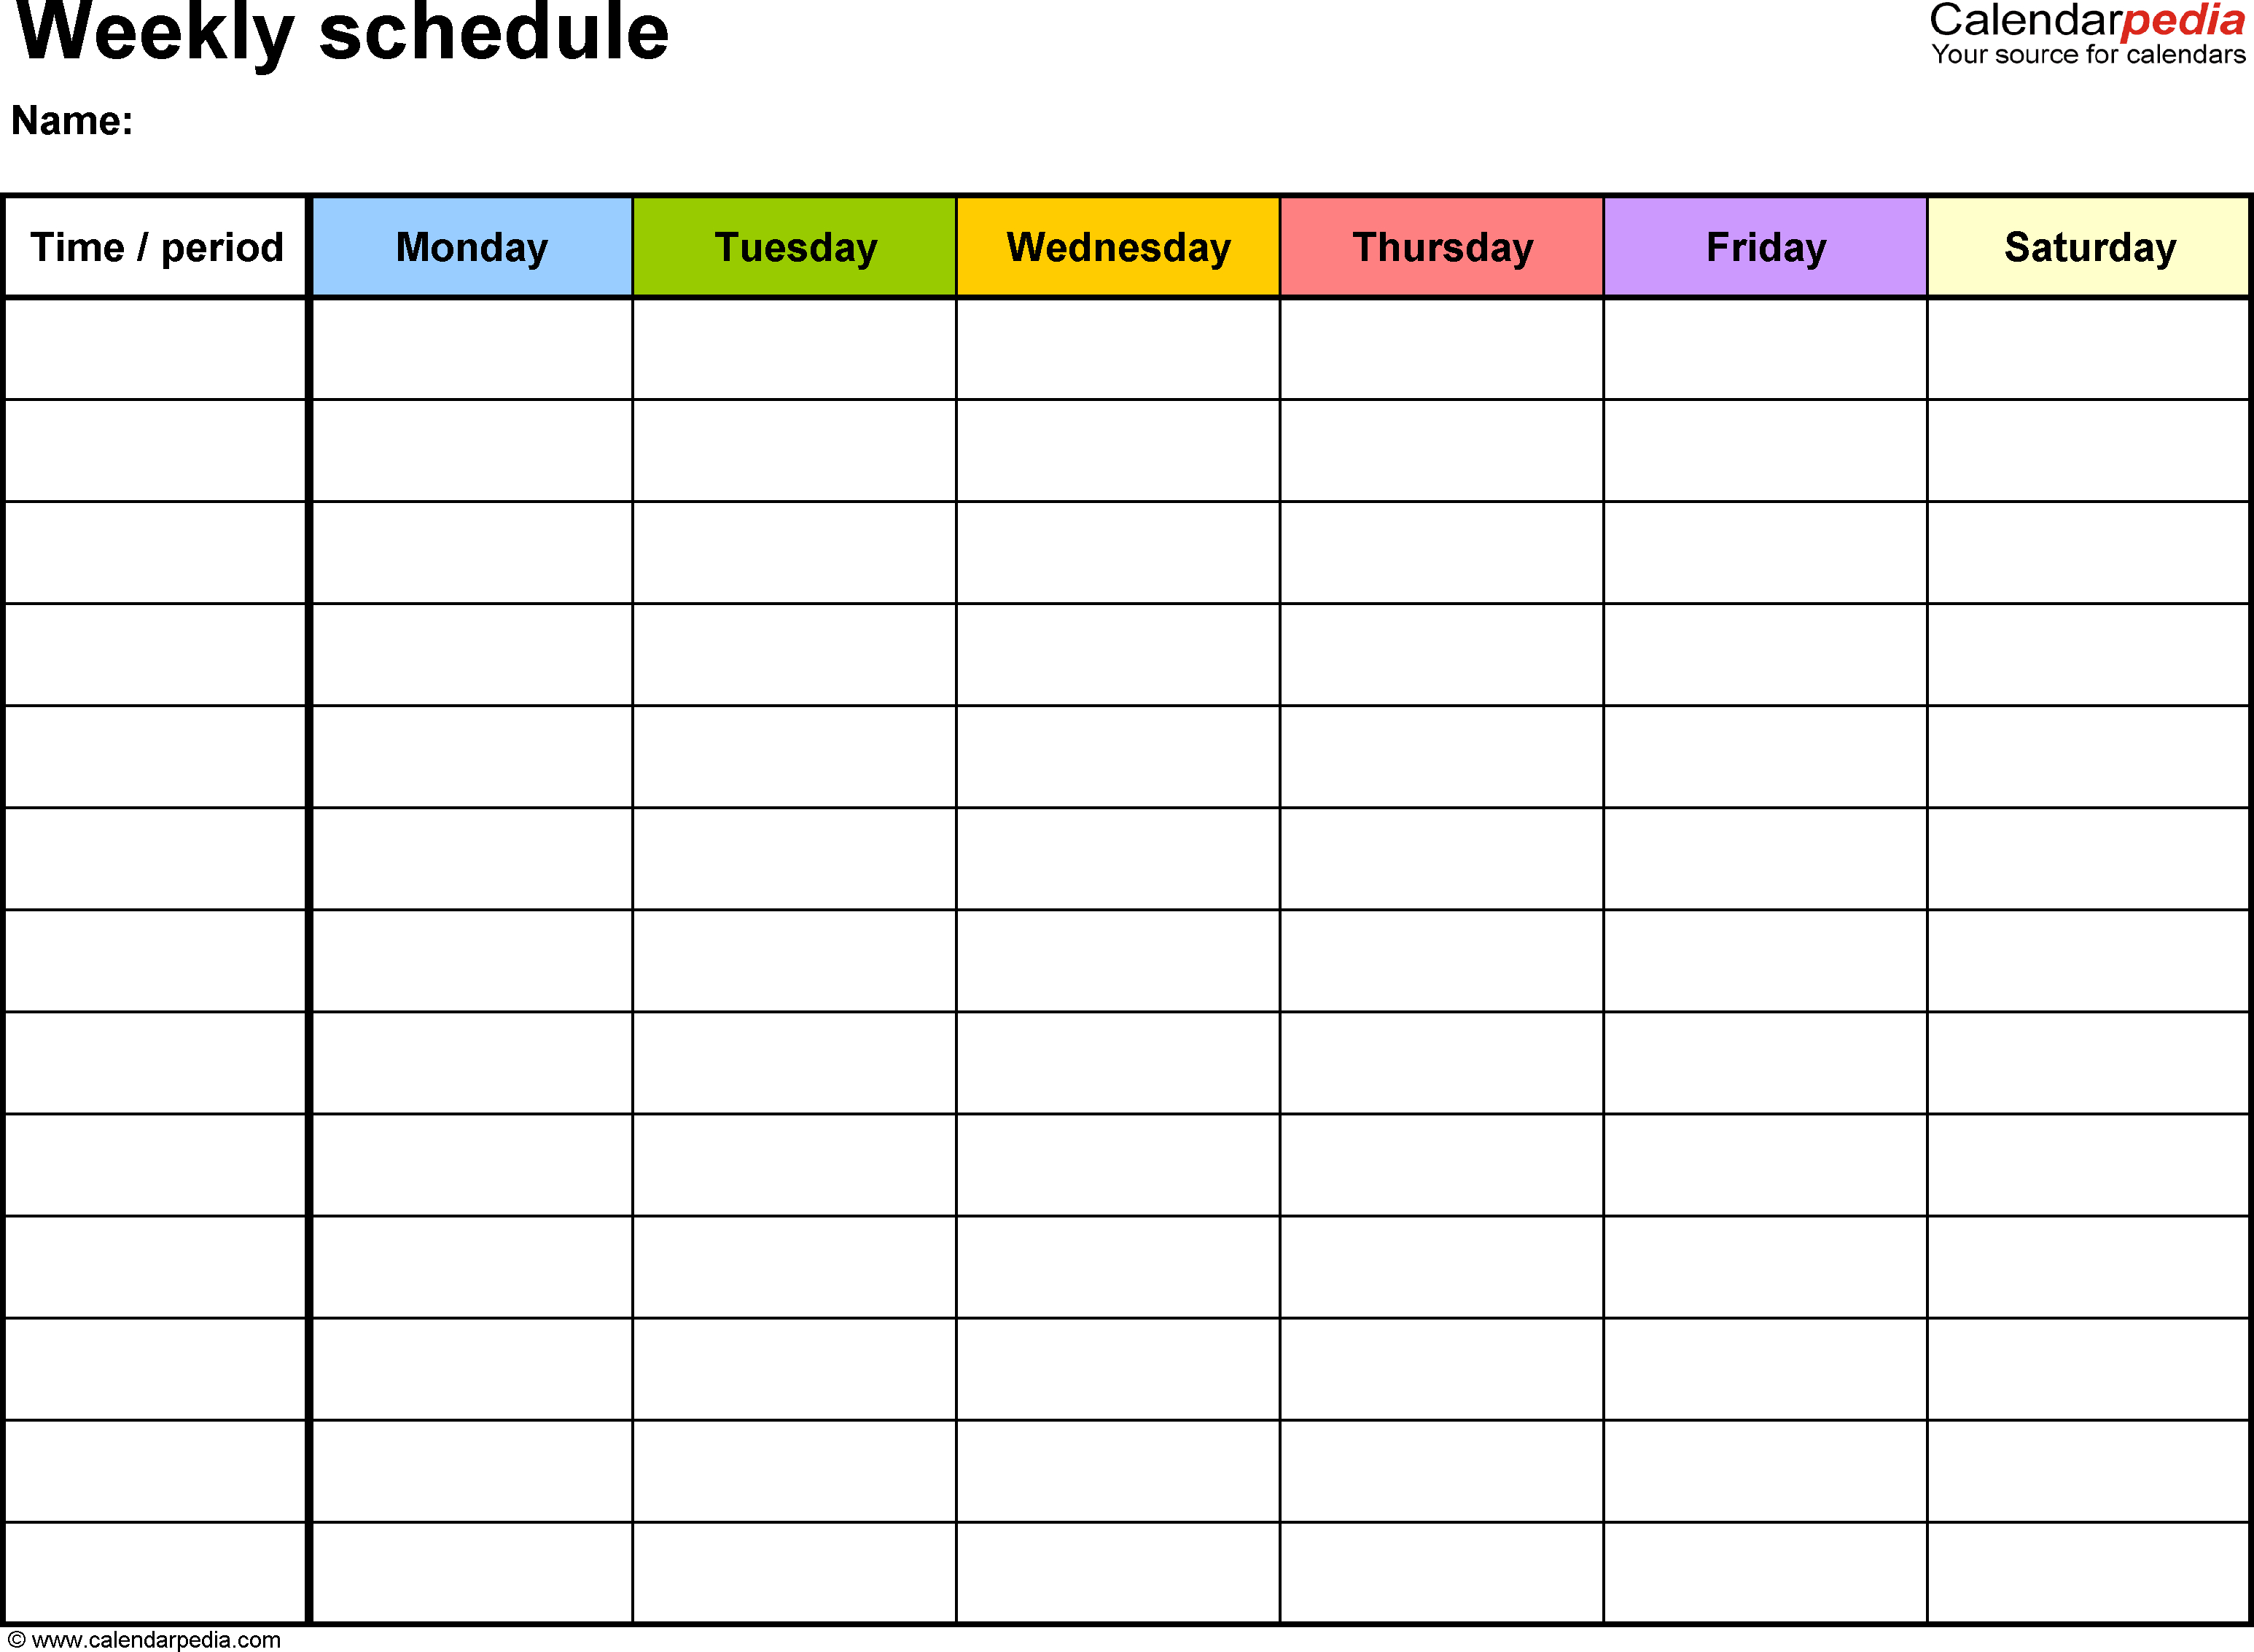 Free Weekly Schedule Templates For Word  18 Templates intended for Weekday Calendar Printable